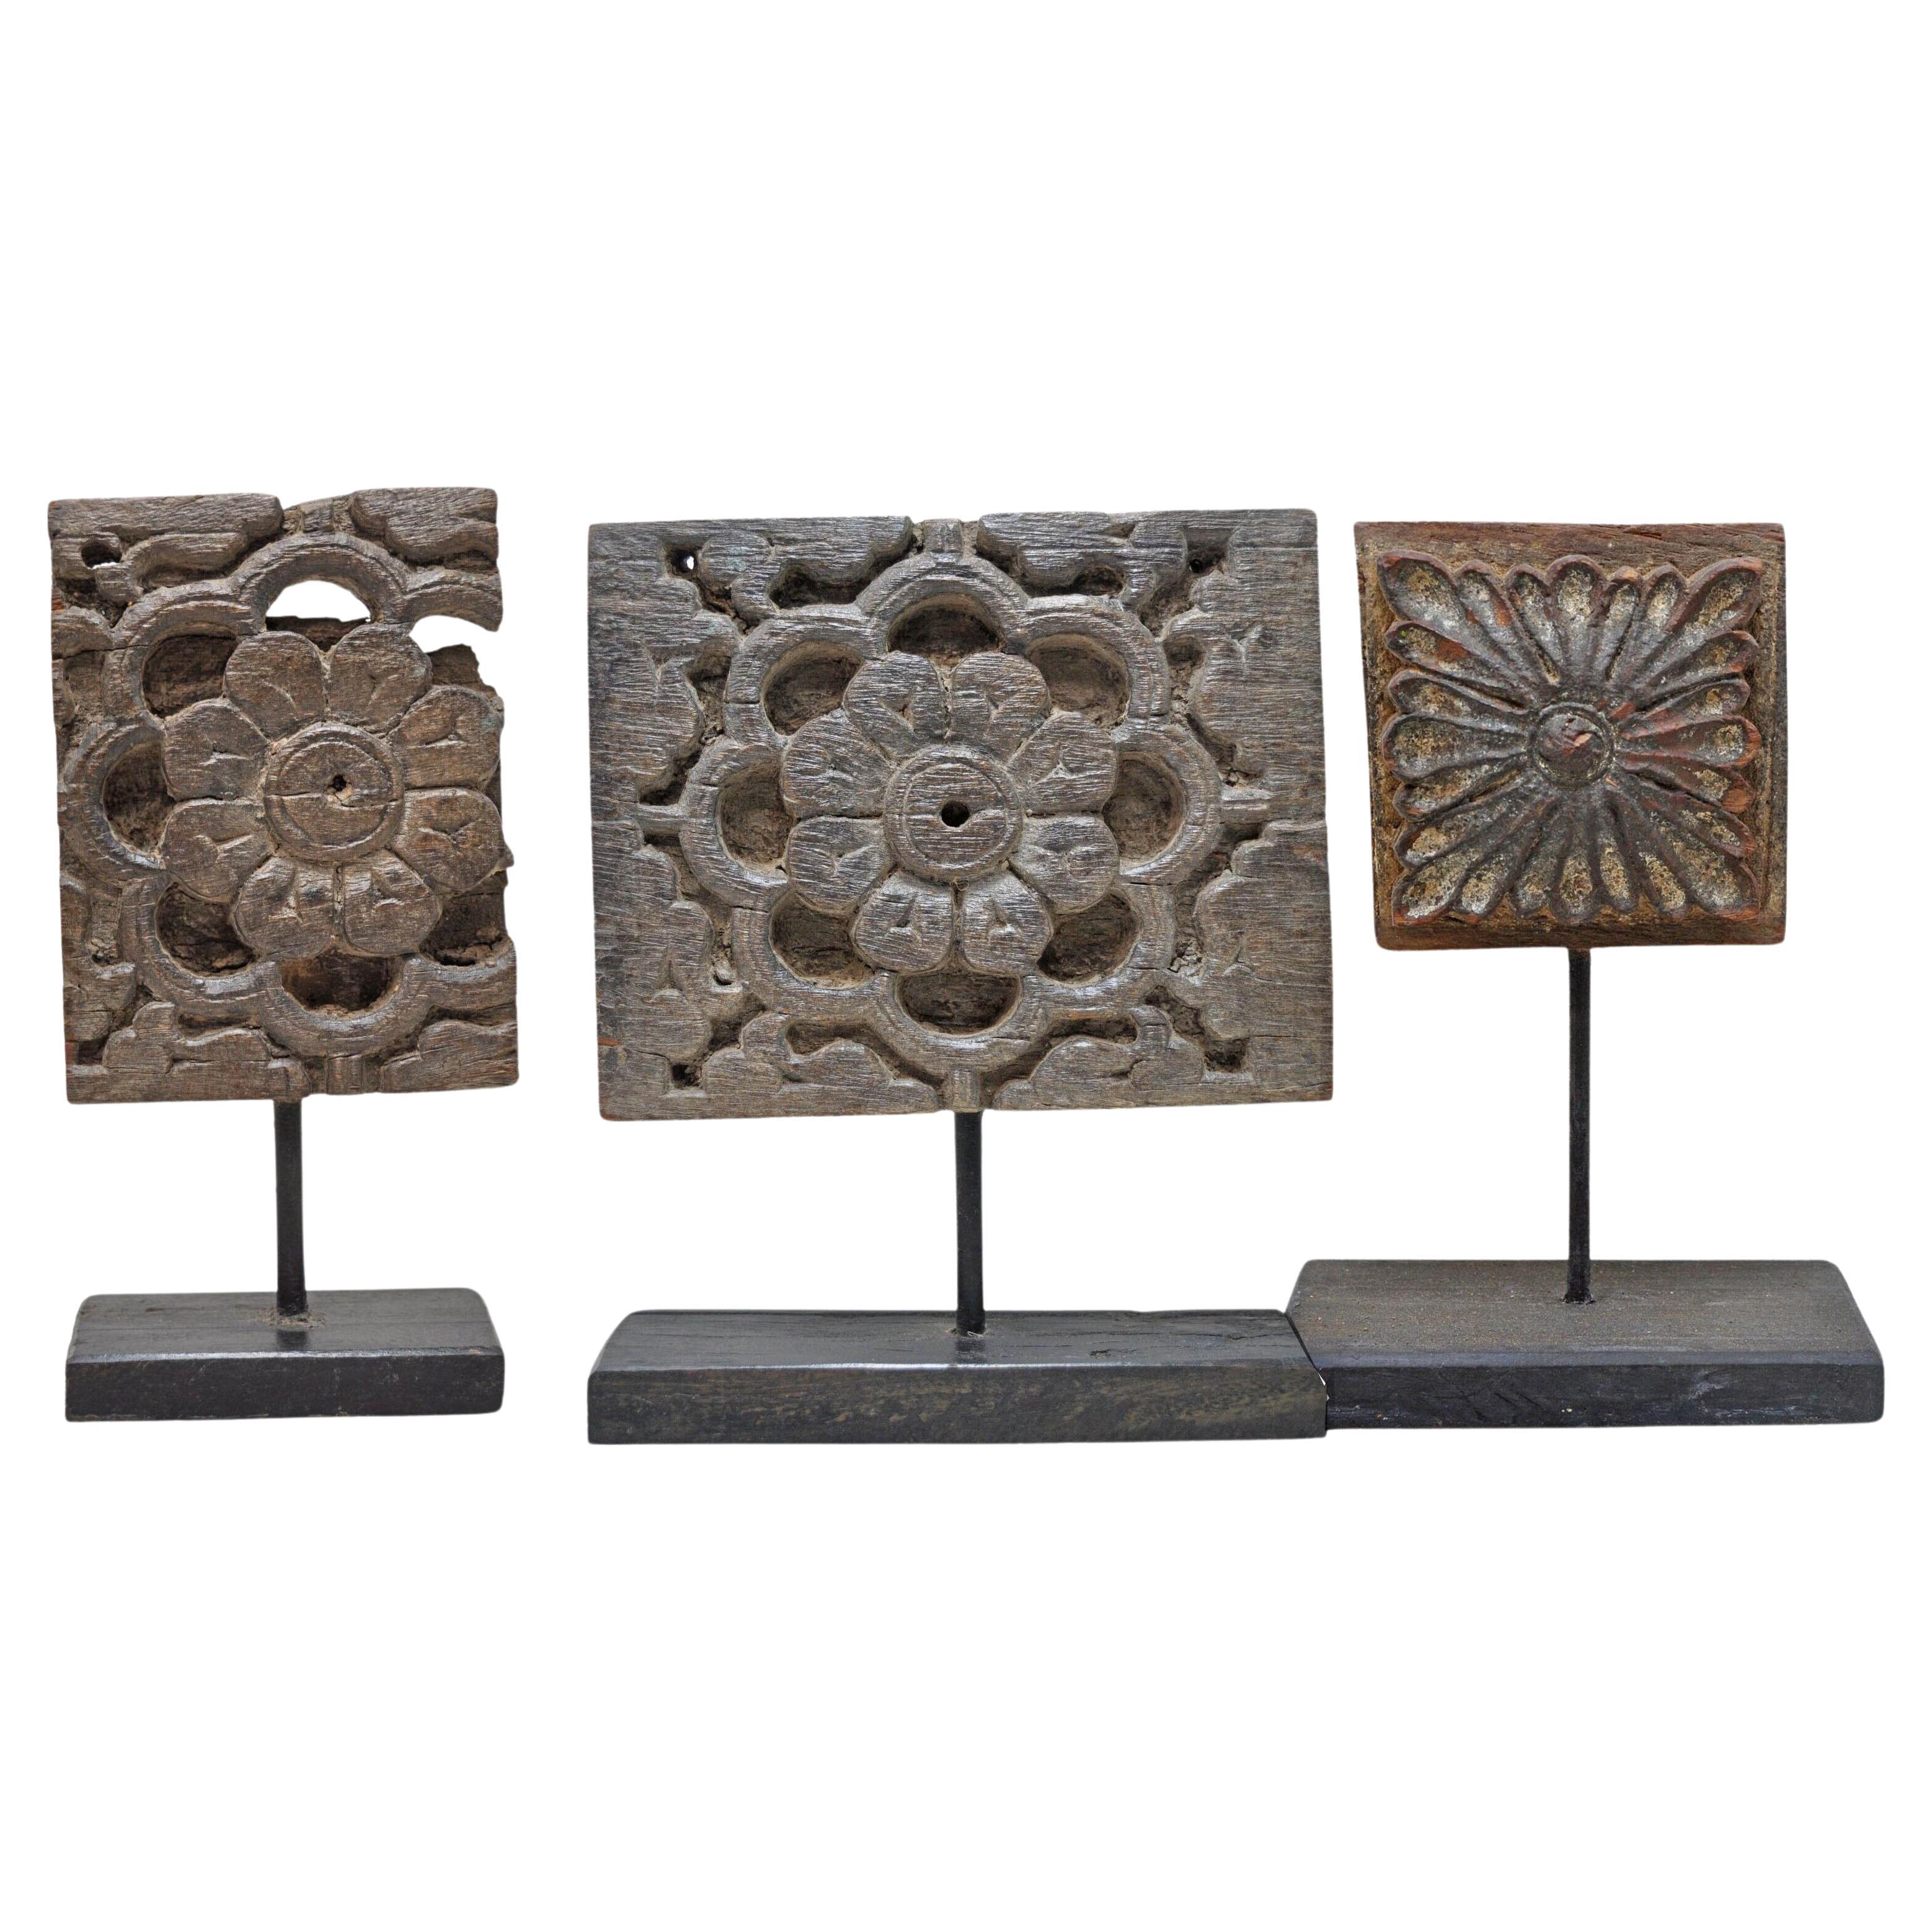 Collection of 3 South Asian Antique Architectural Fragments on Stands